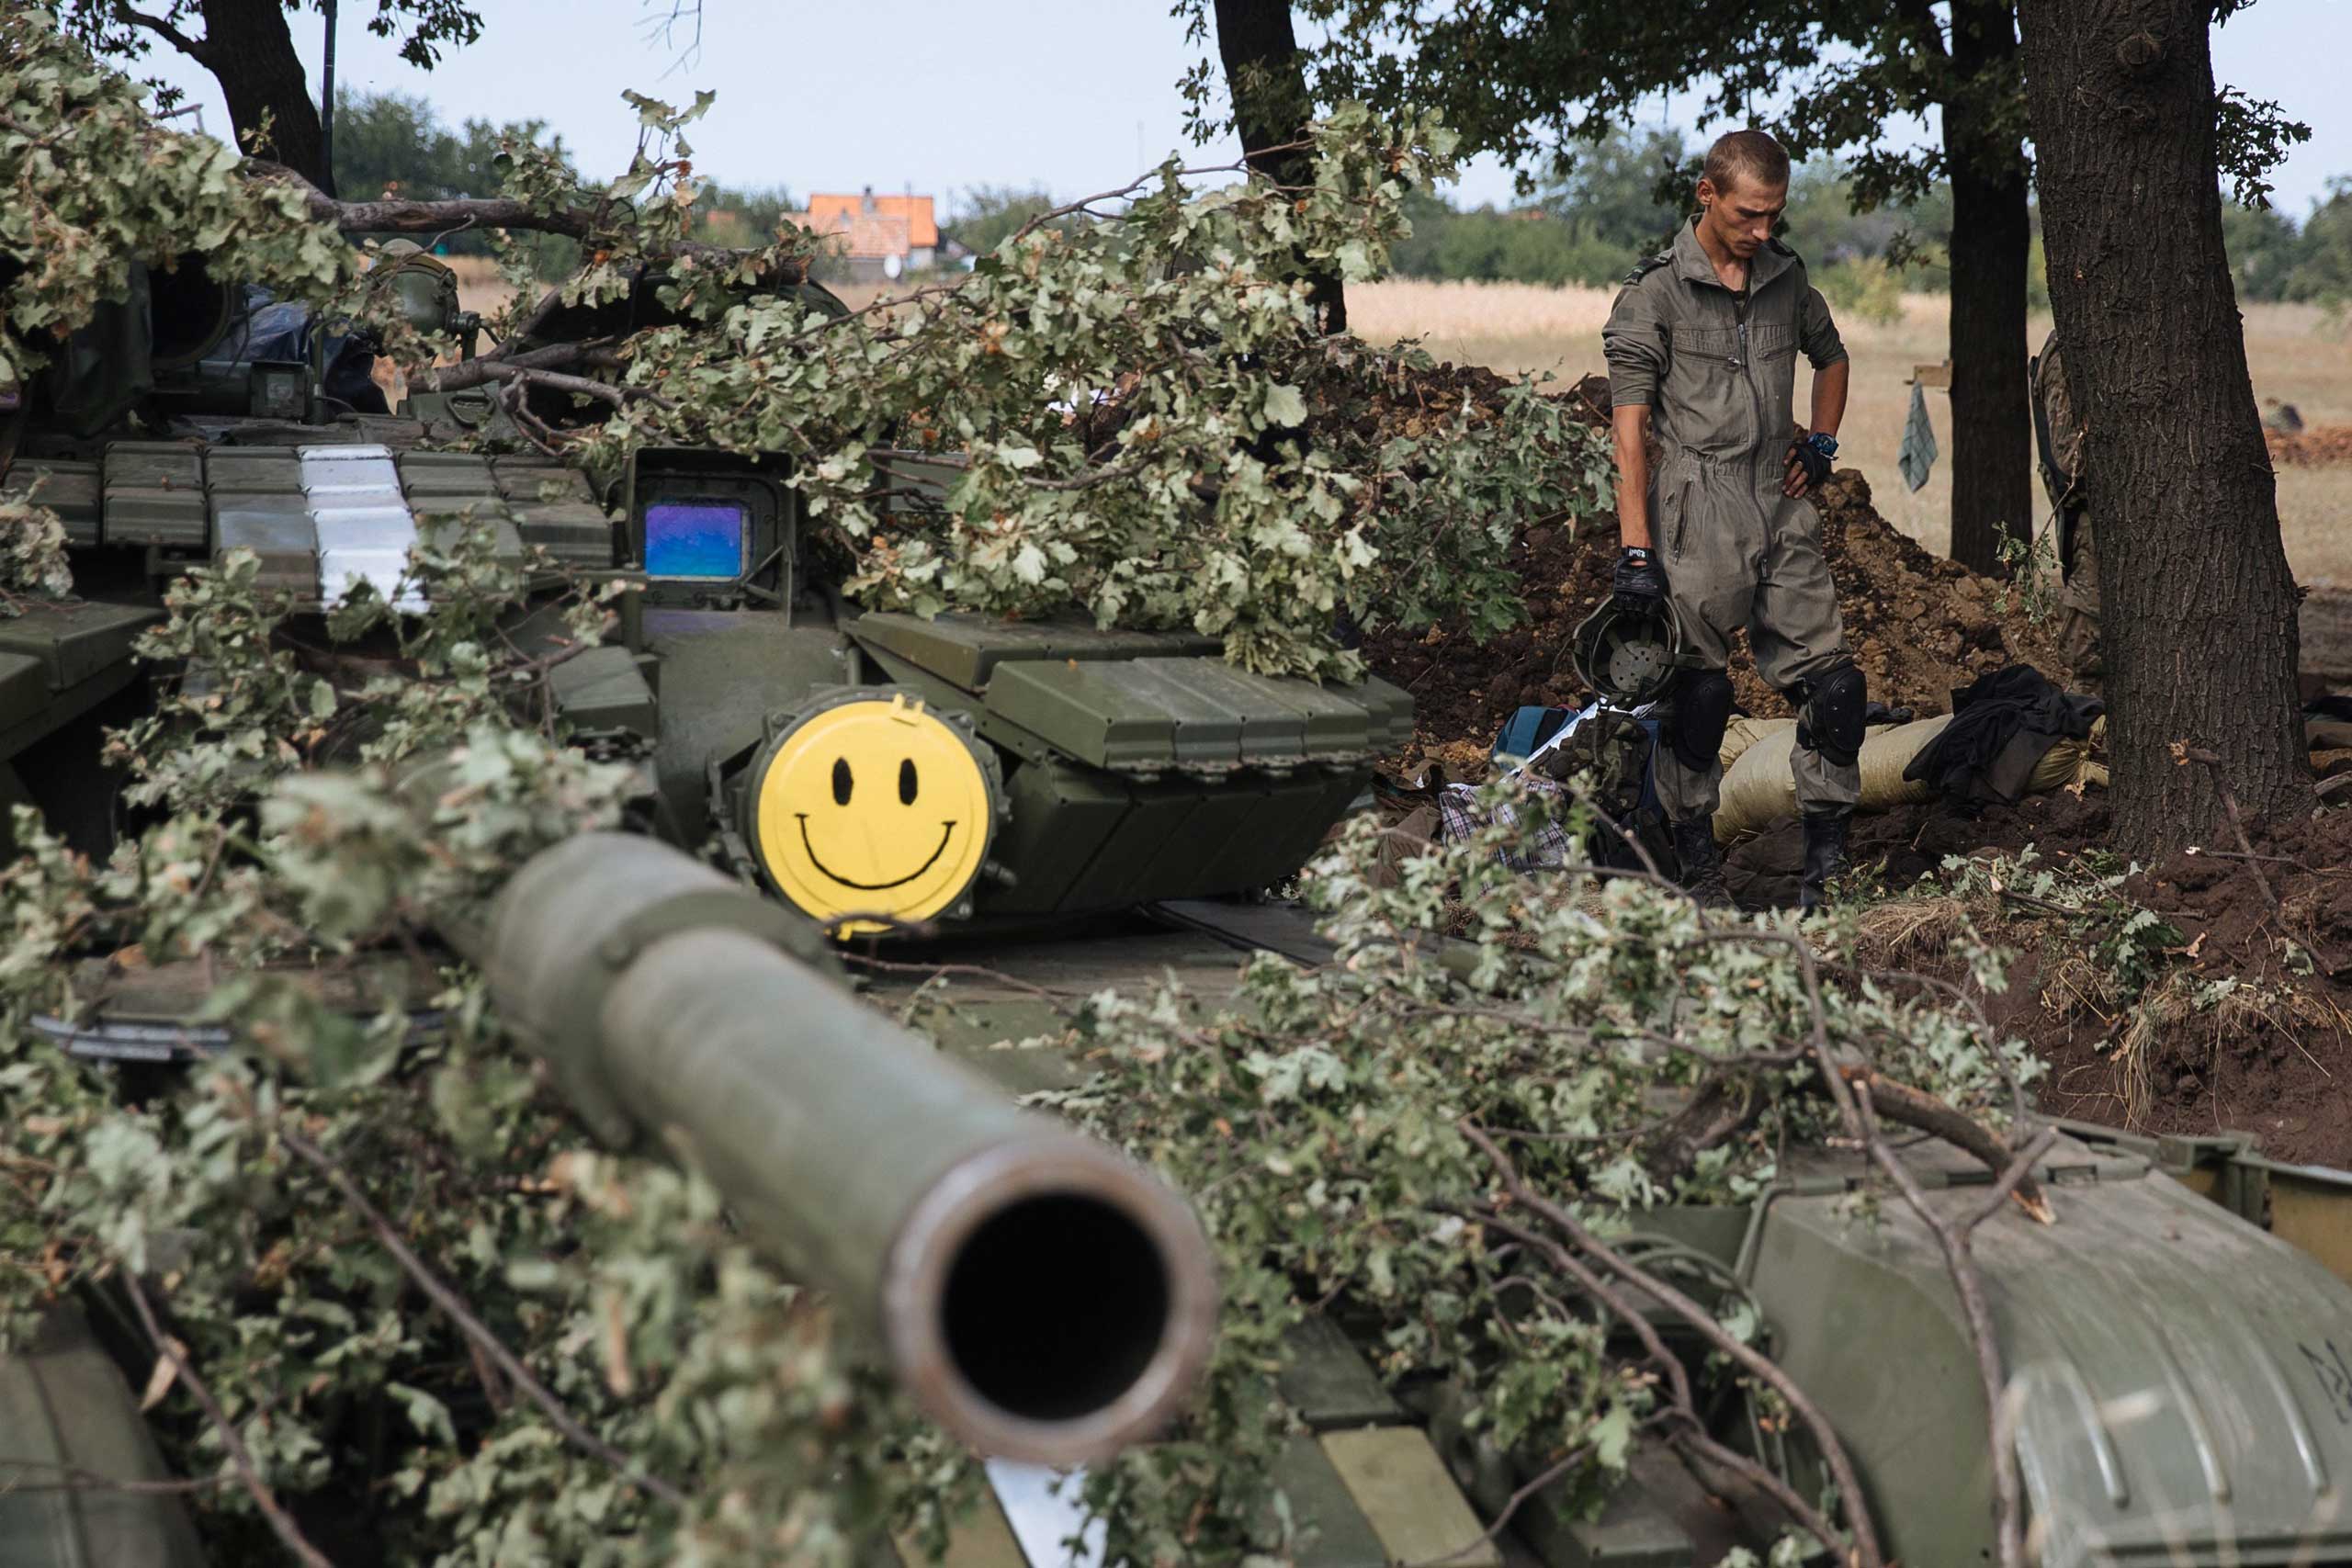 Ukrainian fighters partly wearing non-official uniforms stand next to tank in a military camp based on a front line near Pervomaysk City in Lugansk region, Ukraine on Sept. 12, 2014.